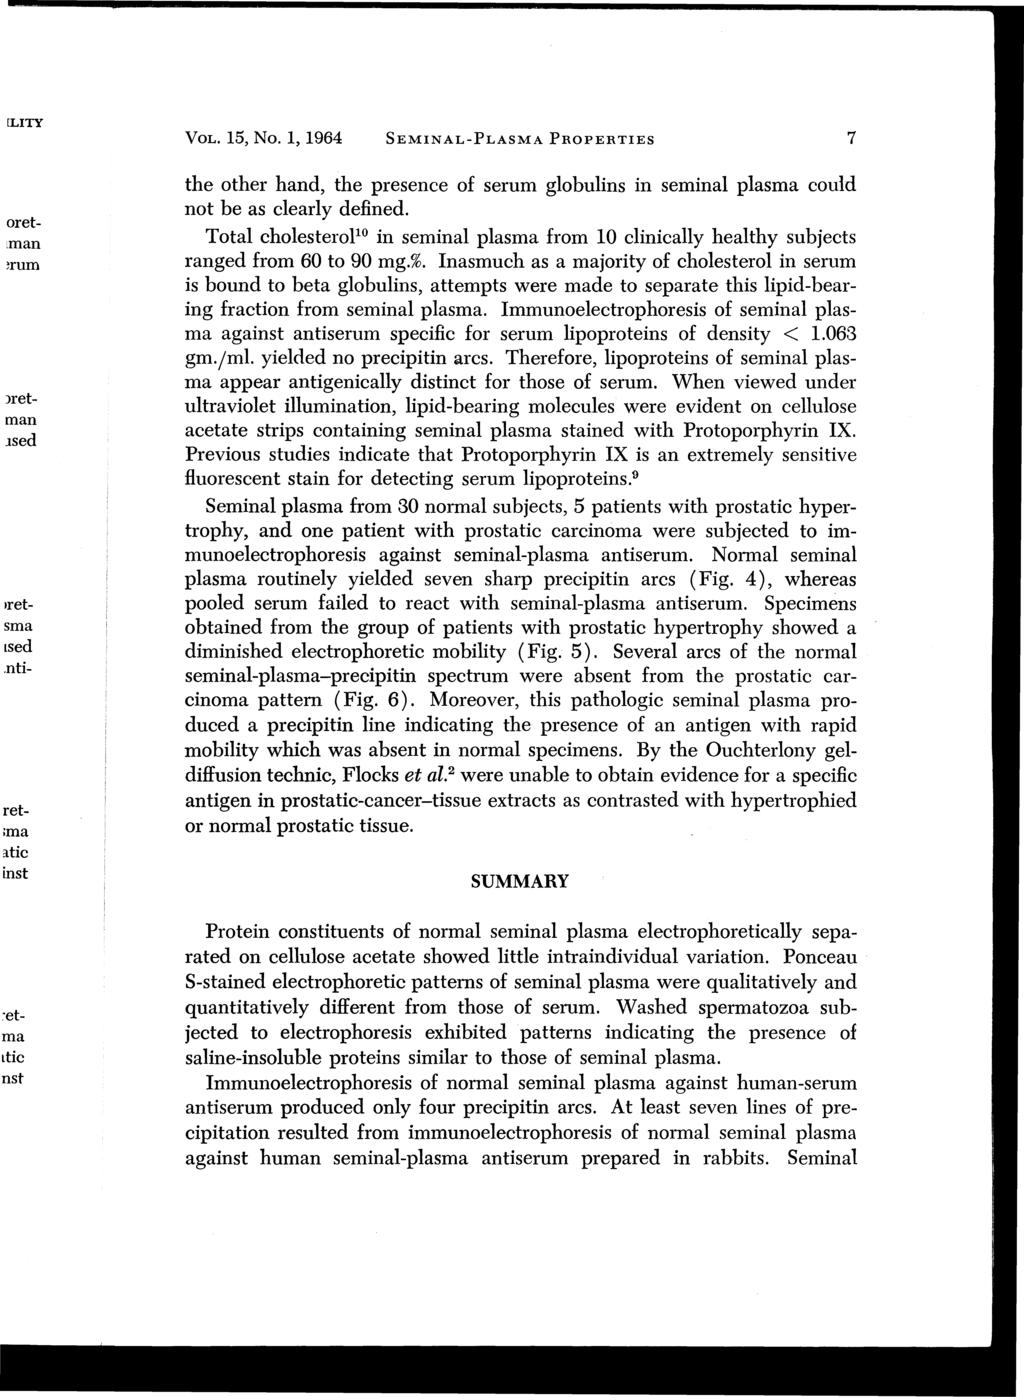 VOL. 15, No.1, 1964 SEMINAL-PLASMA PROPERTIES 7 the other hand, the presence of serum globulins in seminal plasma could not be as clearly defined.